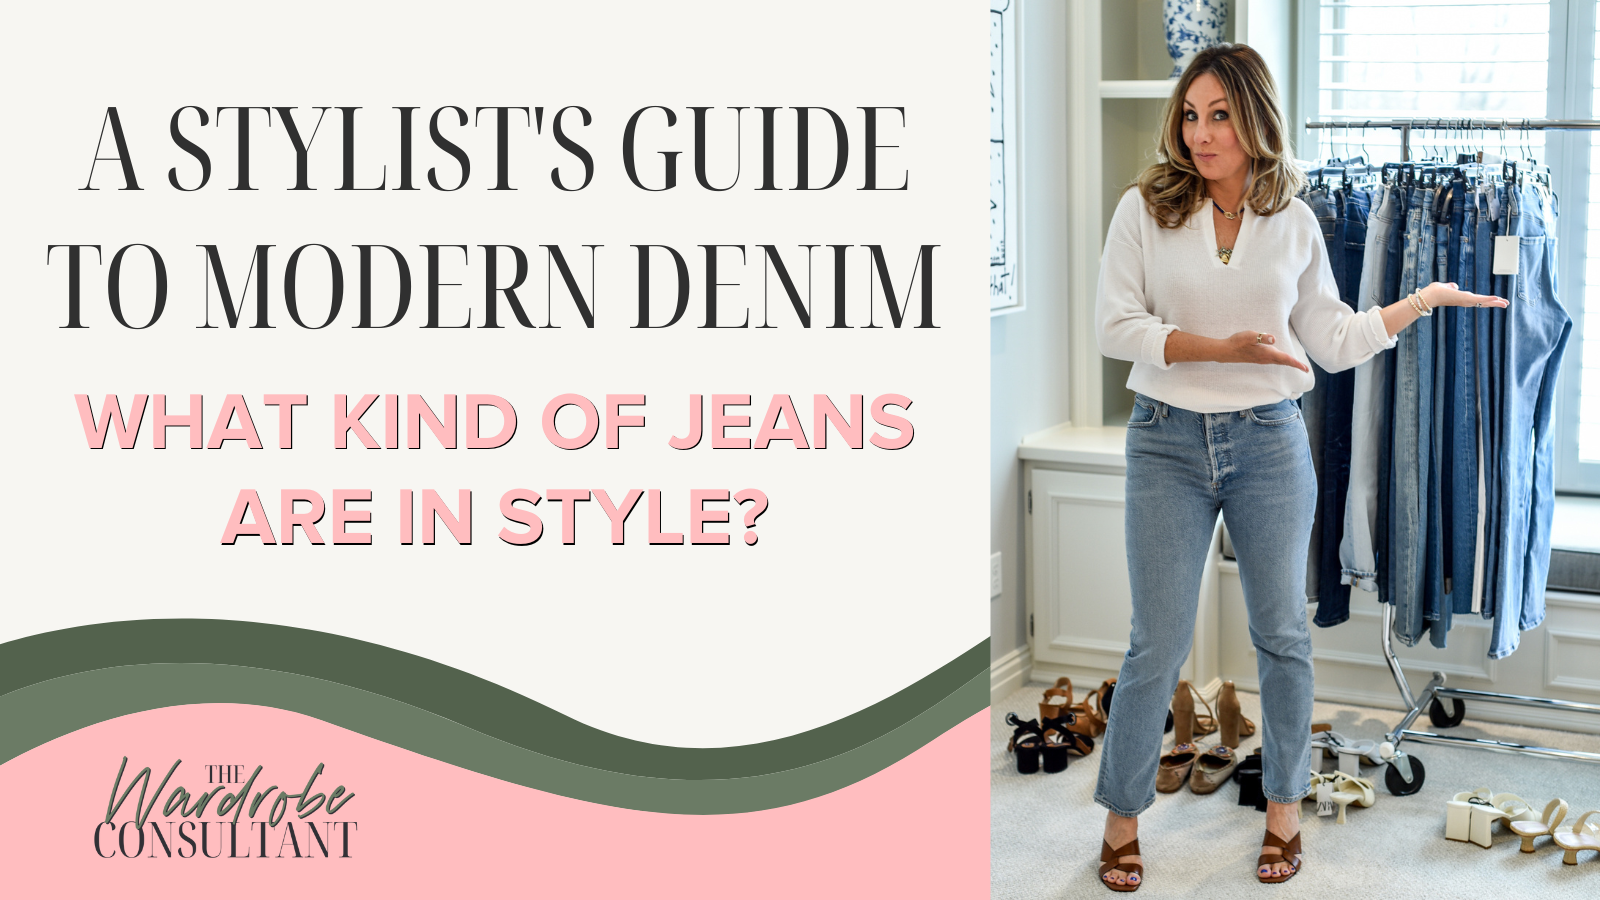 A Stylist's Guide to Modern Denim - What of Jeans are in Style? — The Consultant